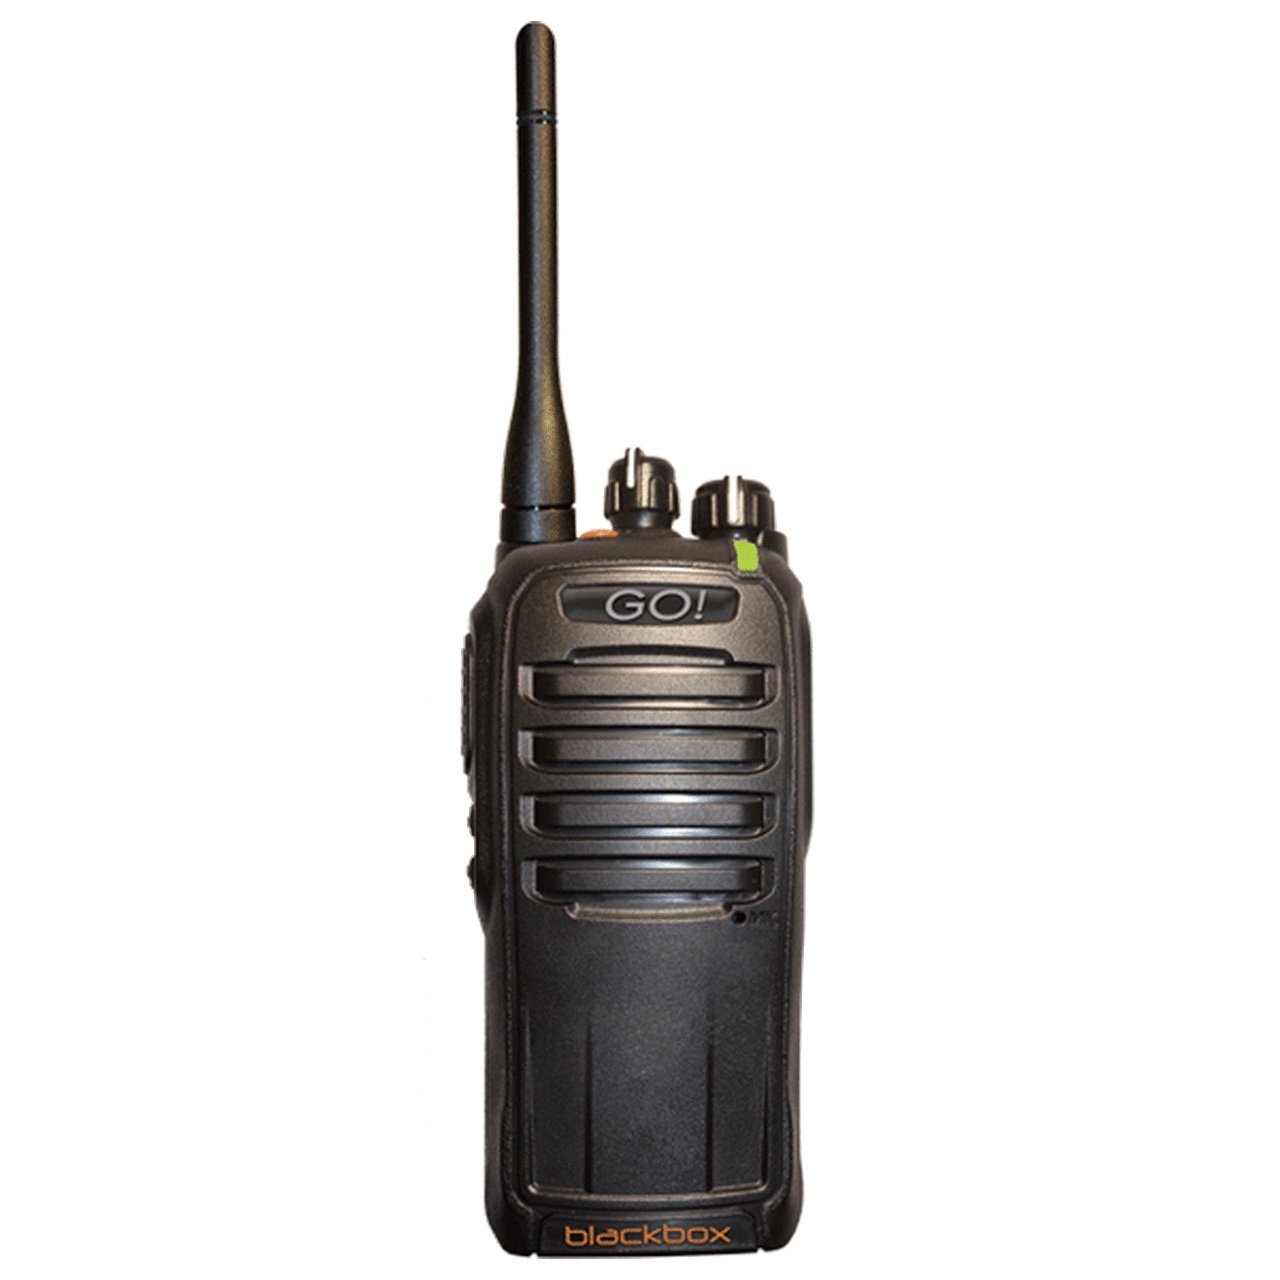 Choosing Communication Devices for Your Crew